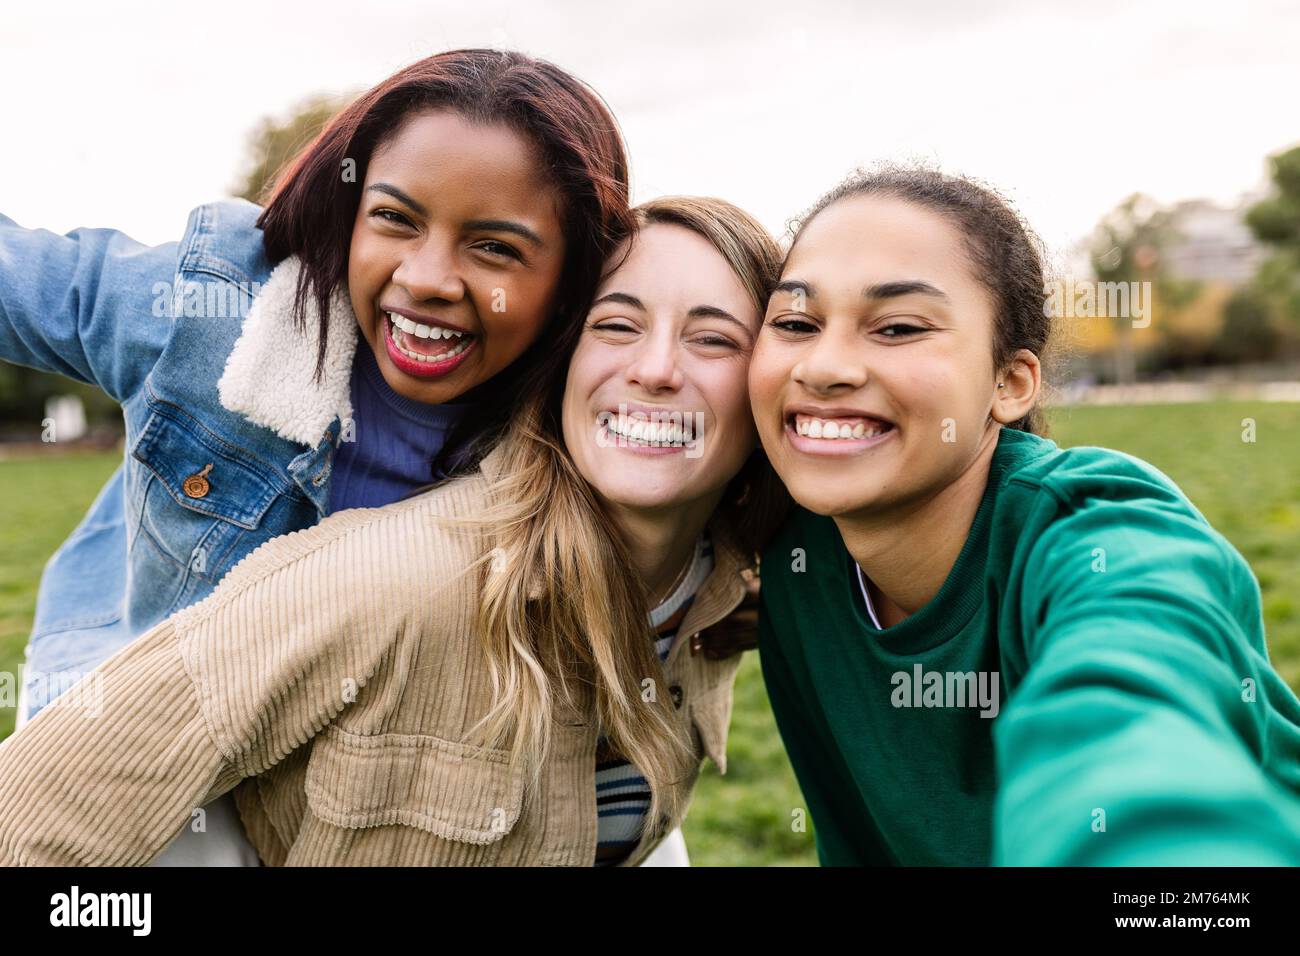 Multi-ethnic group of three young women taking a selfie having fun outdoor Stock Photo